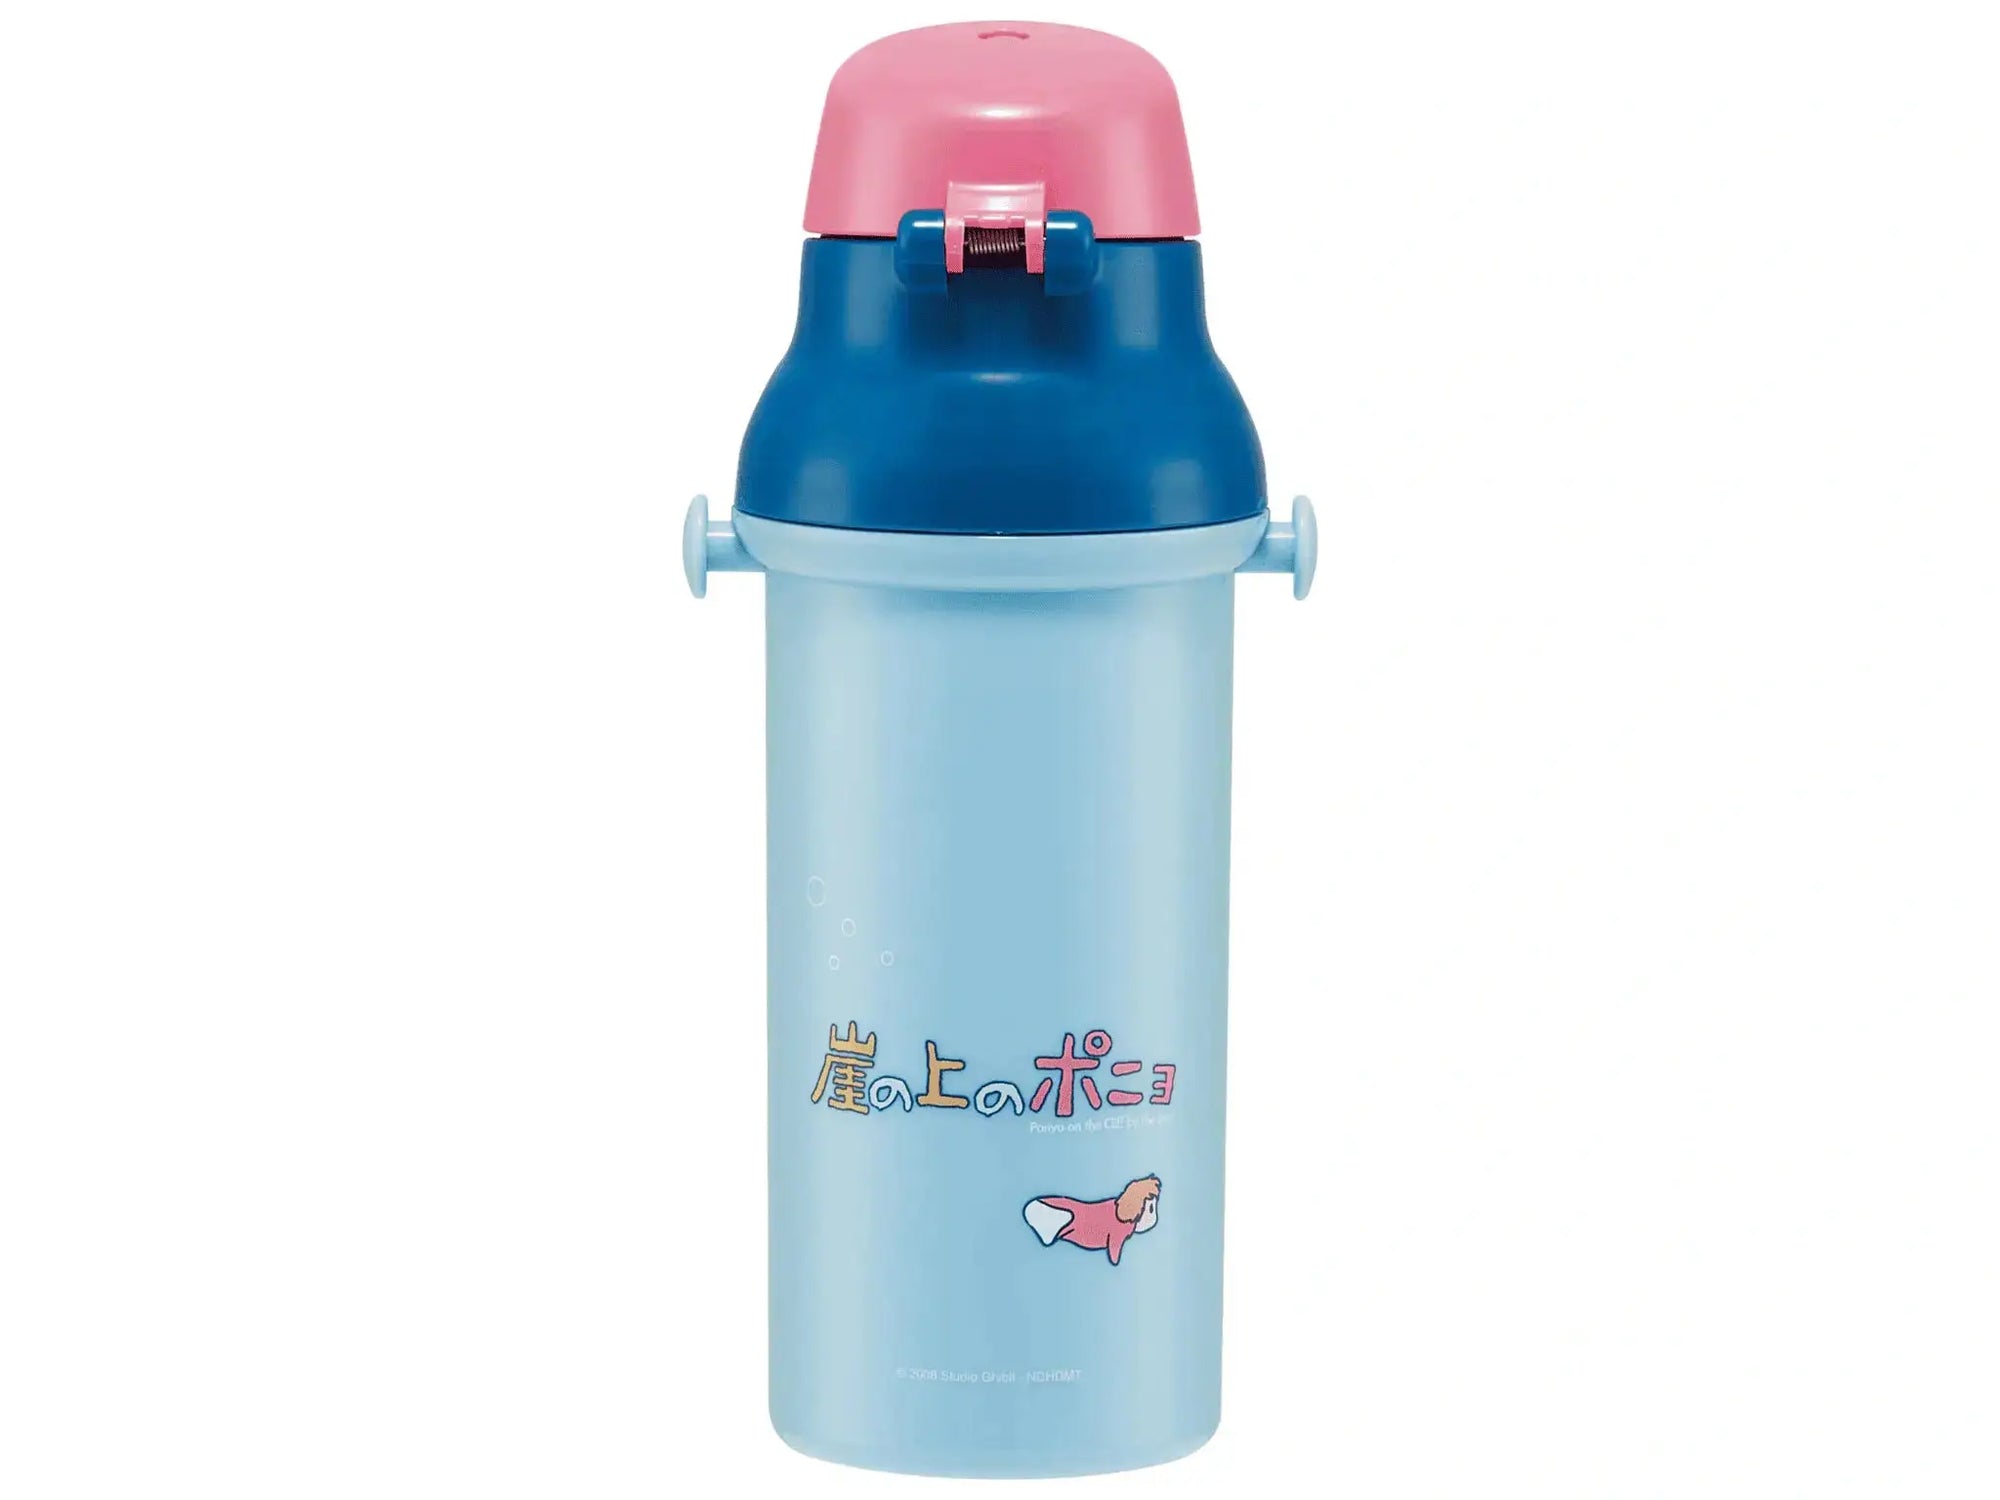 Skater Ponyo One-Touch Drink Bottle 480ml